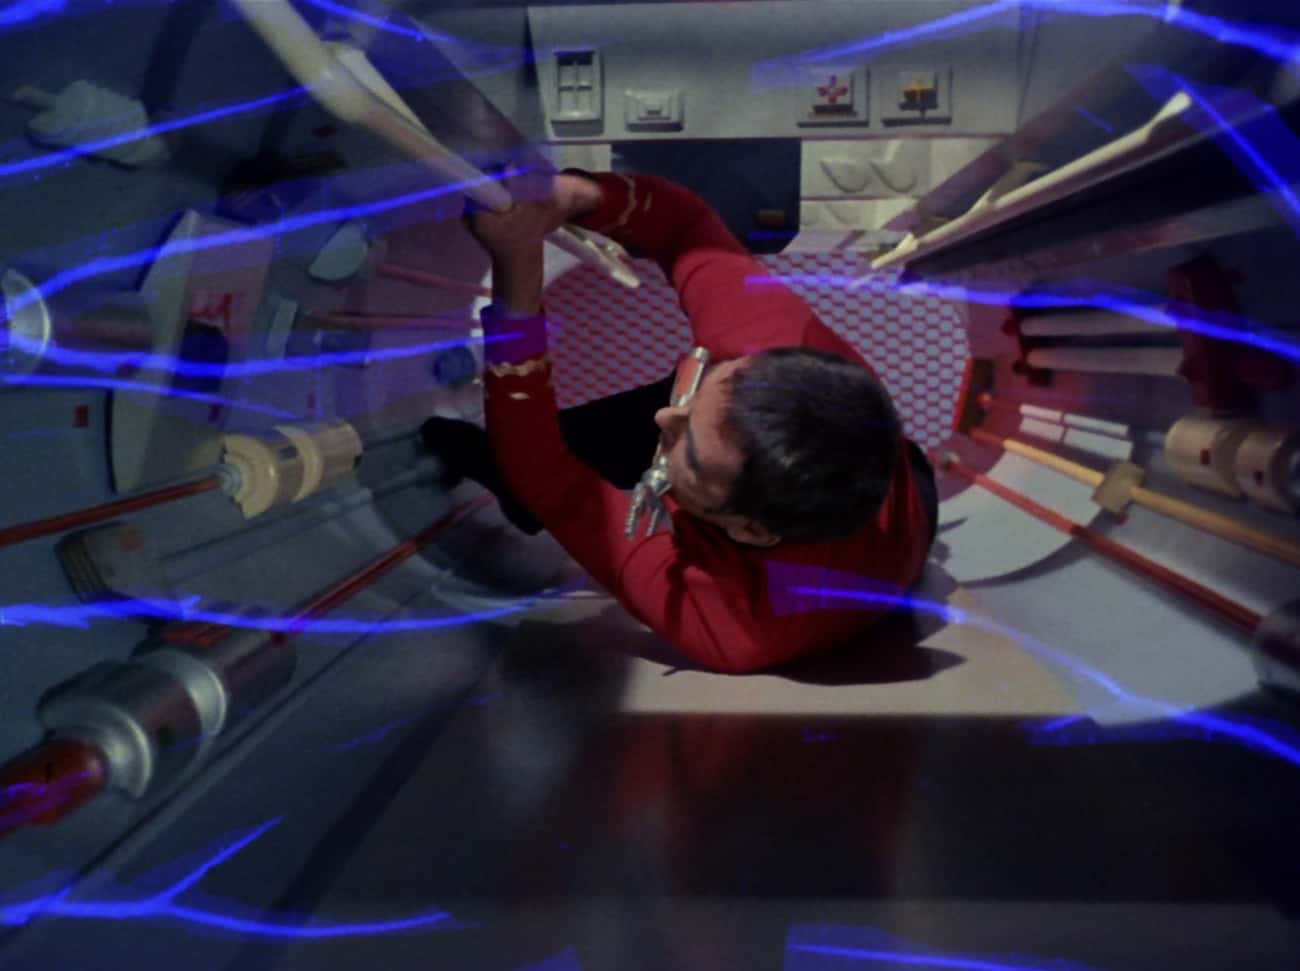 That Time Scotty Saved the Enterprise from Tearing Itself Apart at Warp